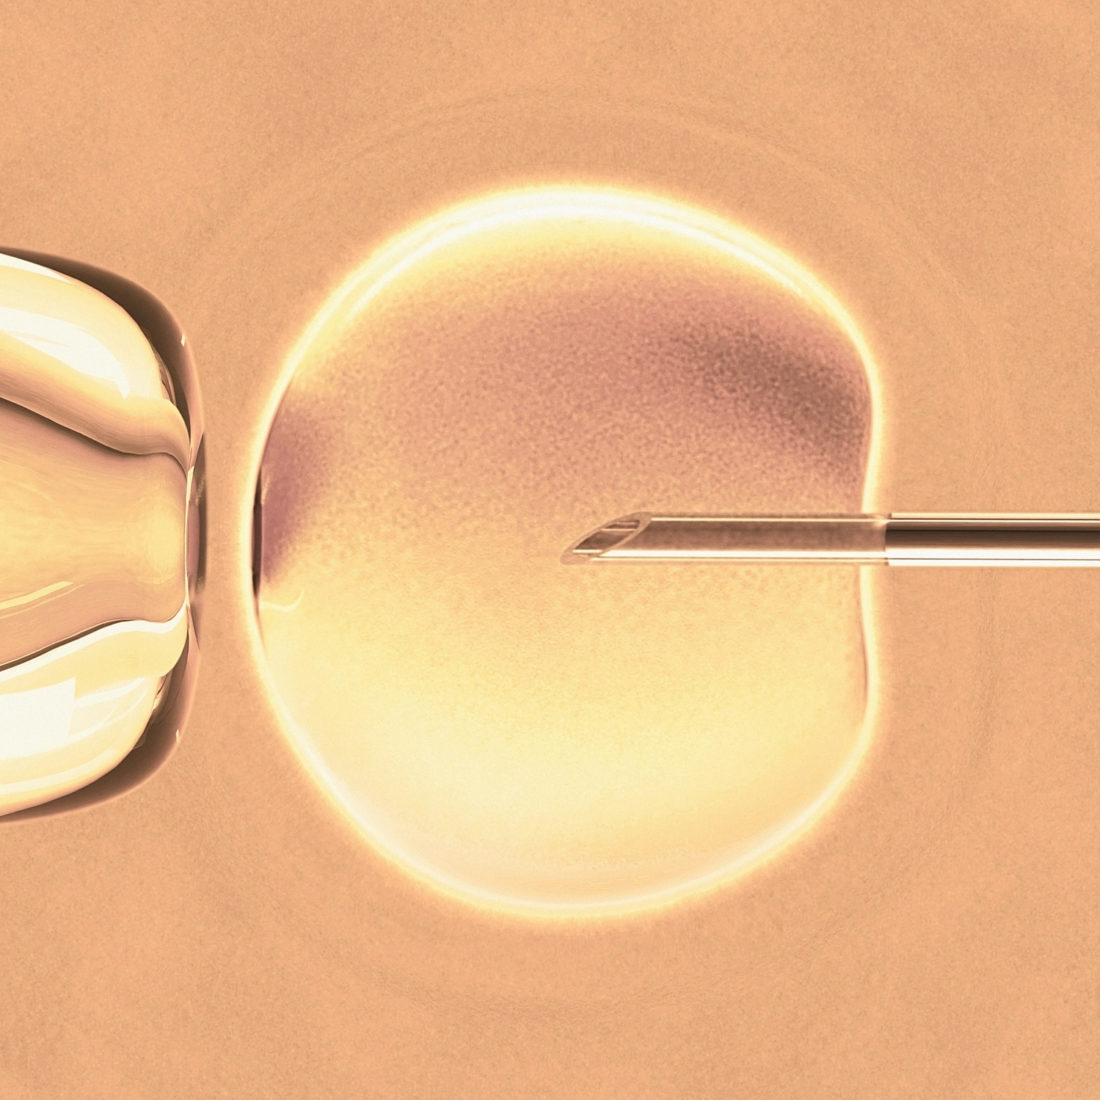 Microscopic view of IVF